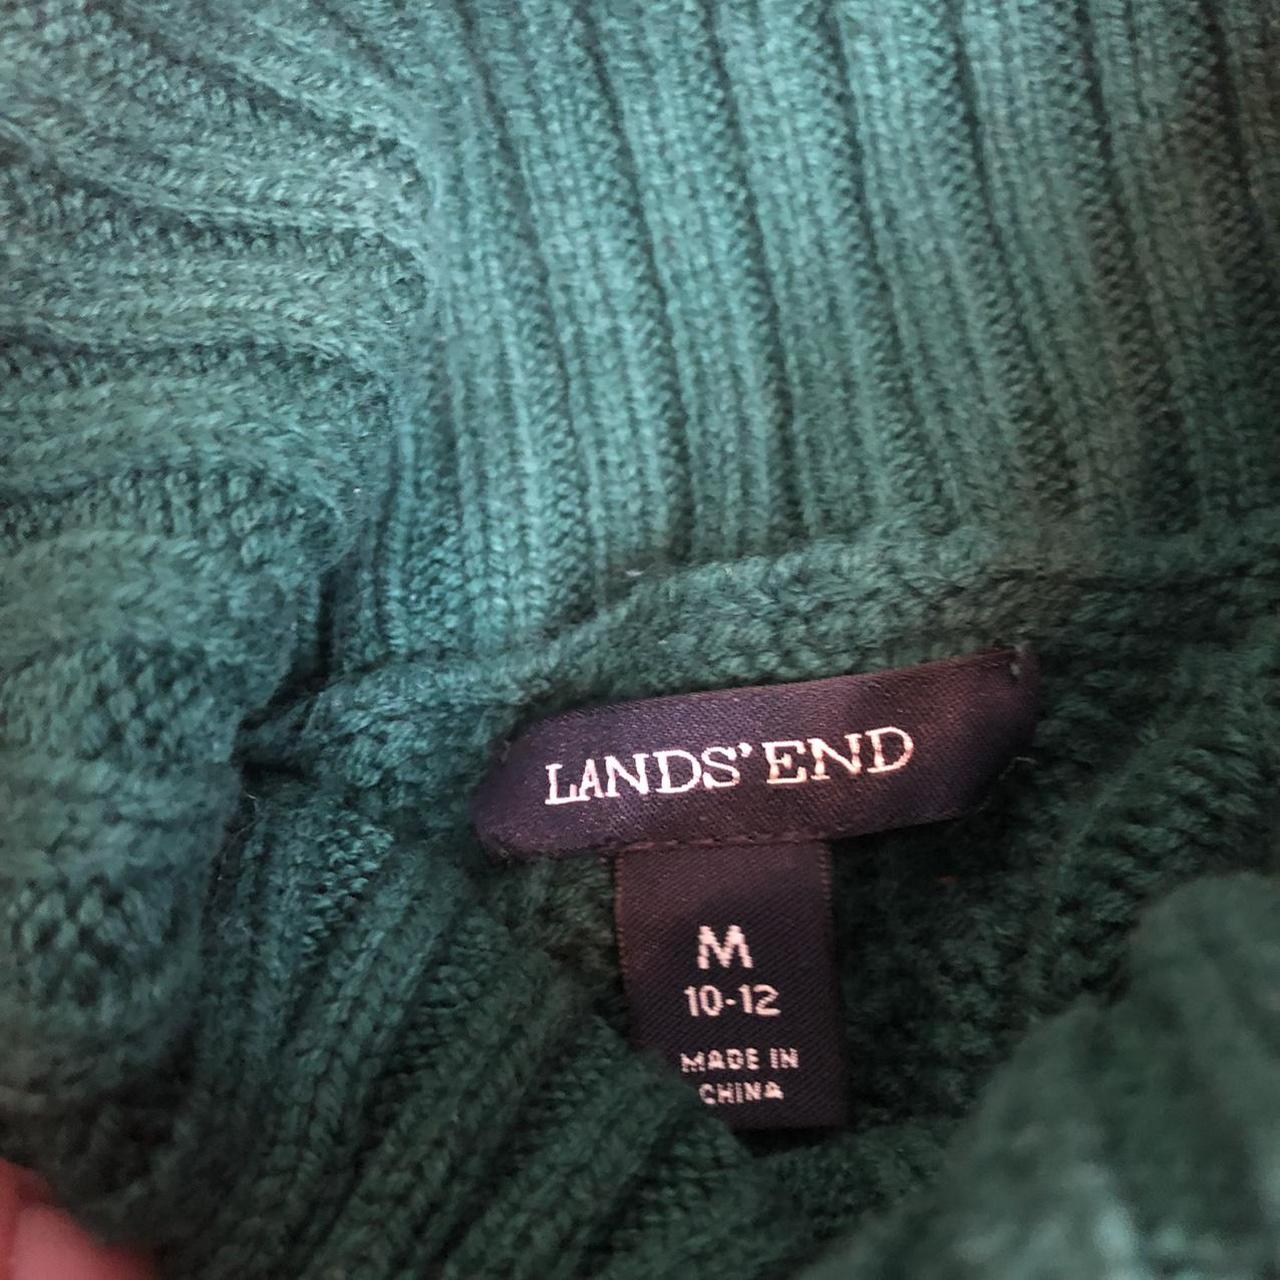 Emerald green cable knit turtleneck sweater by Lands... - Depop